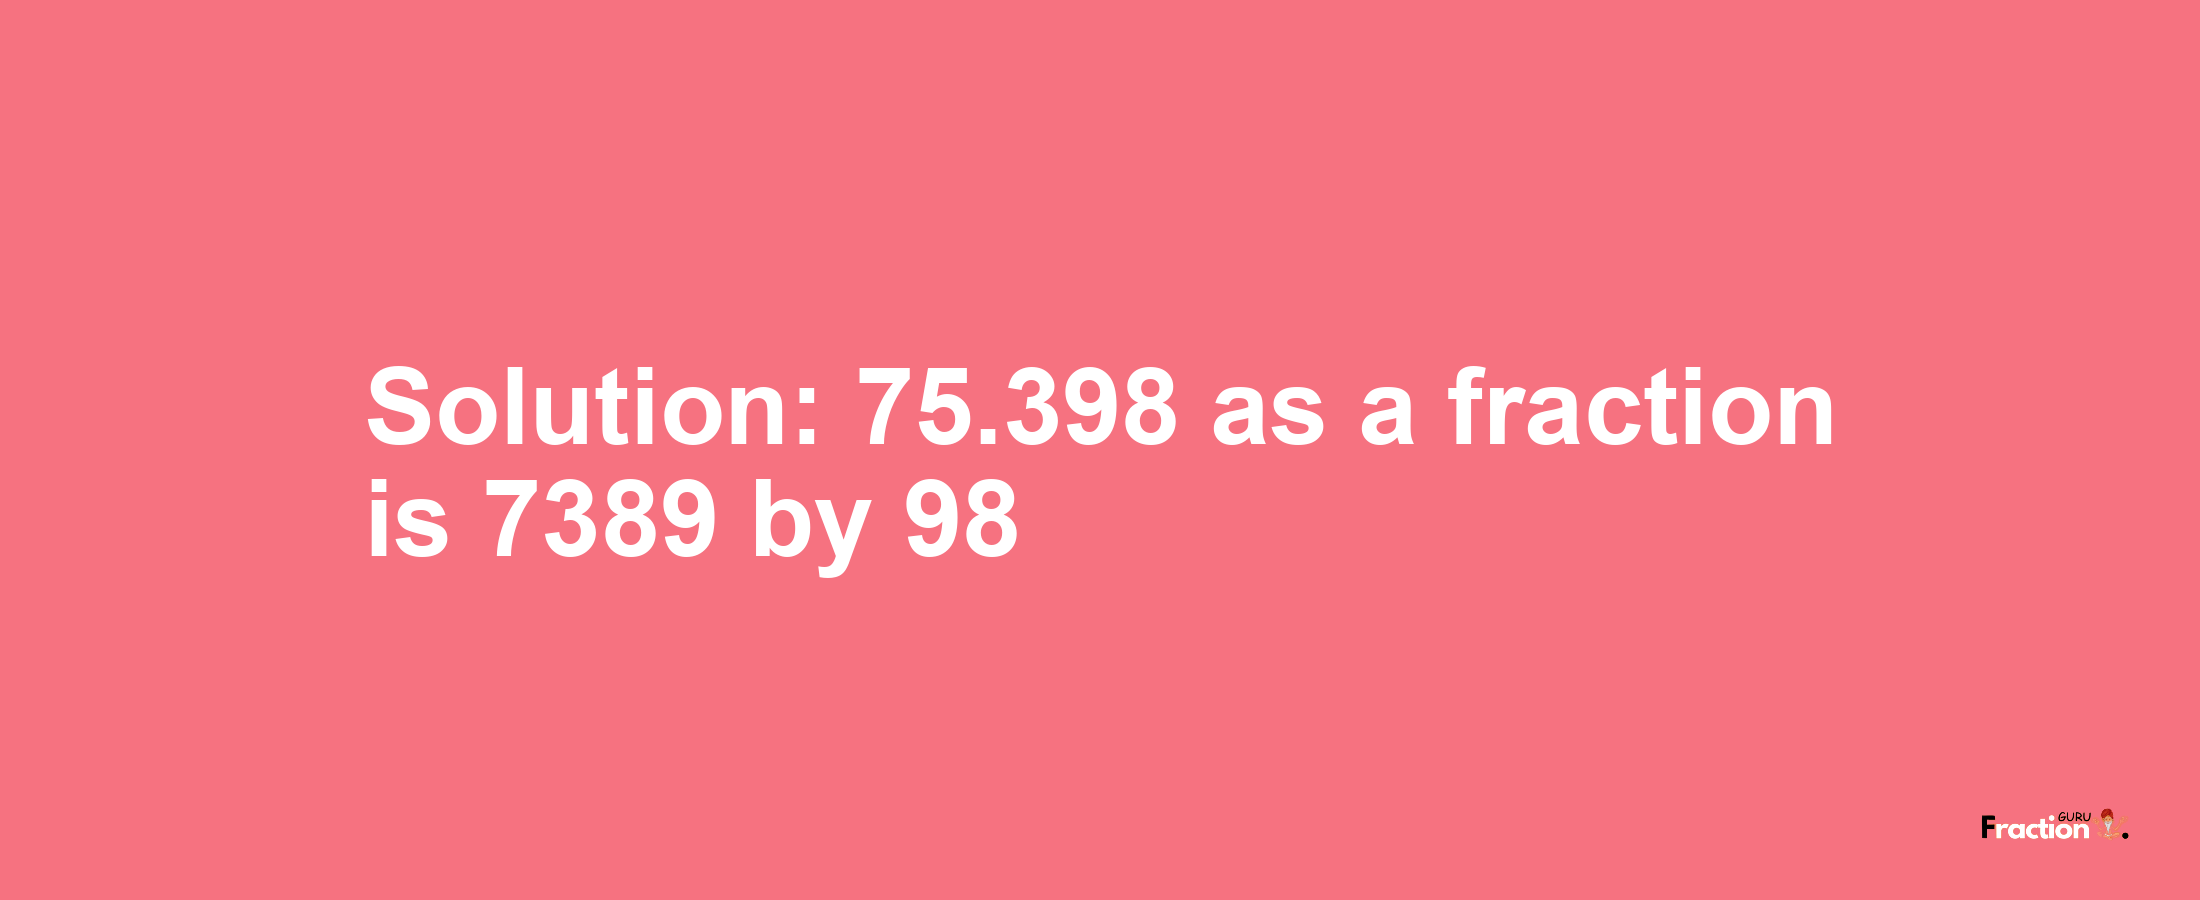 Solution:75.398 as a fraction is 7389/98